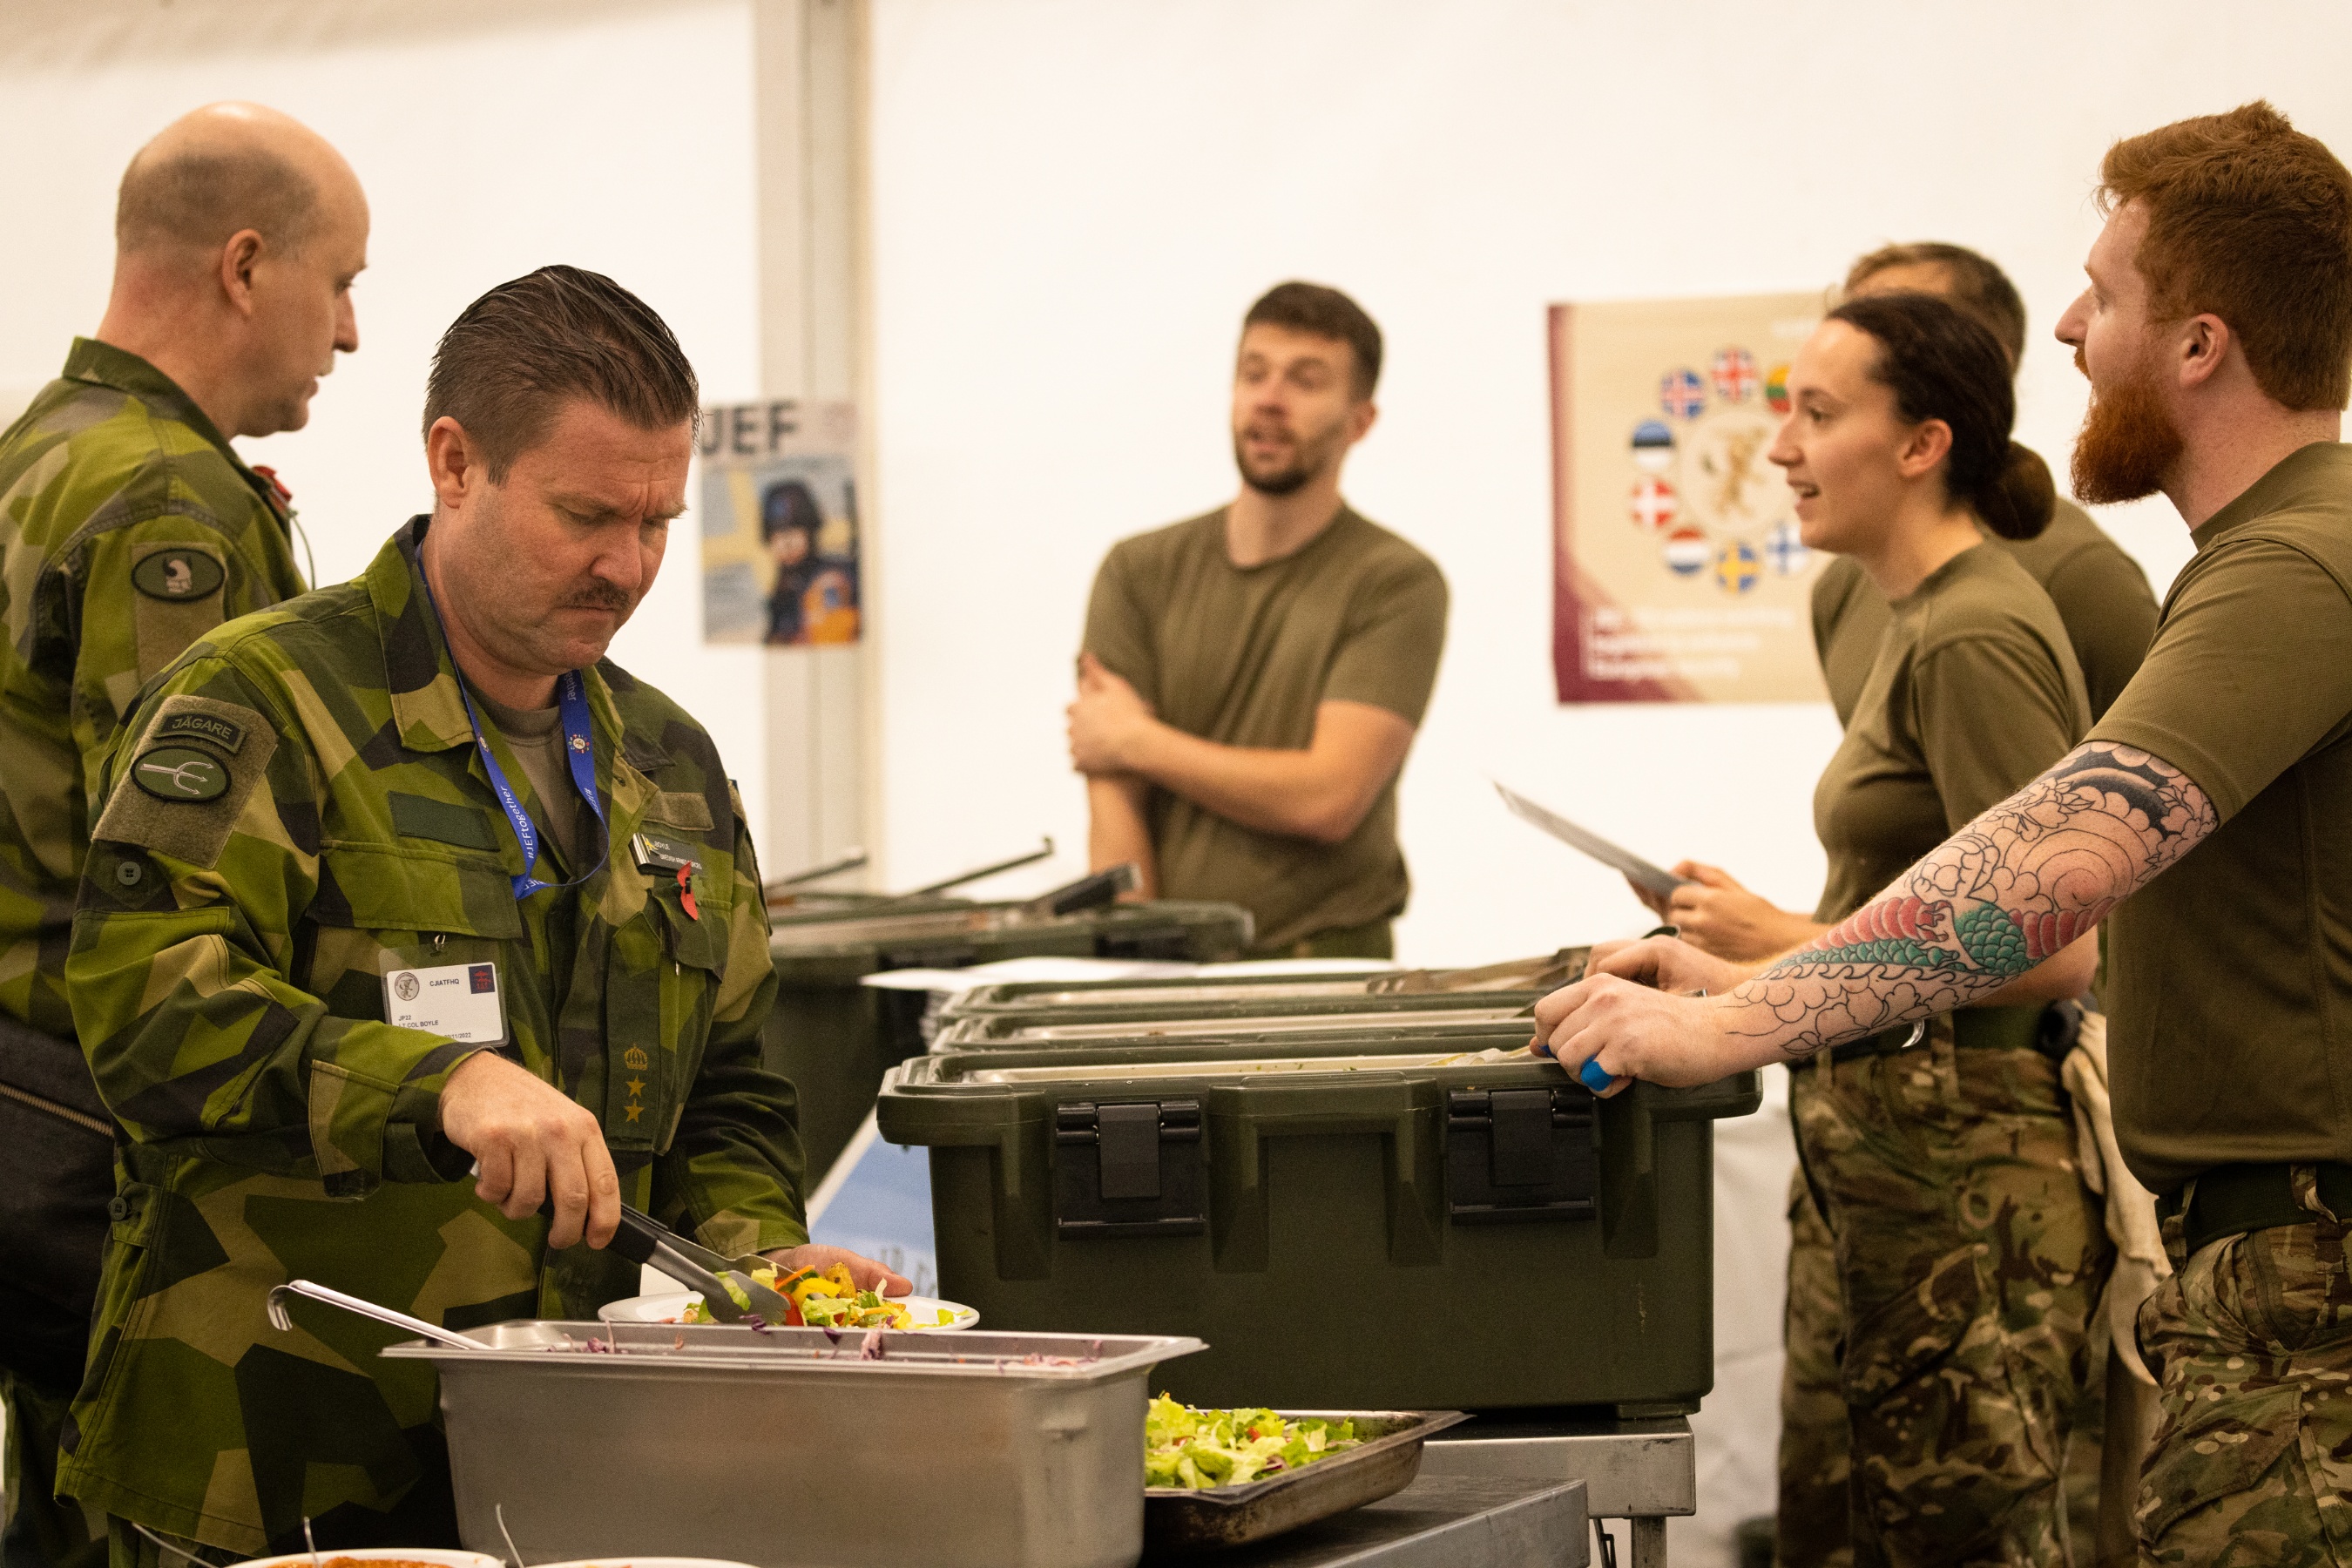 Image shows personnel in a catering hall.